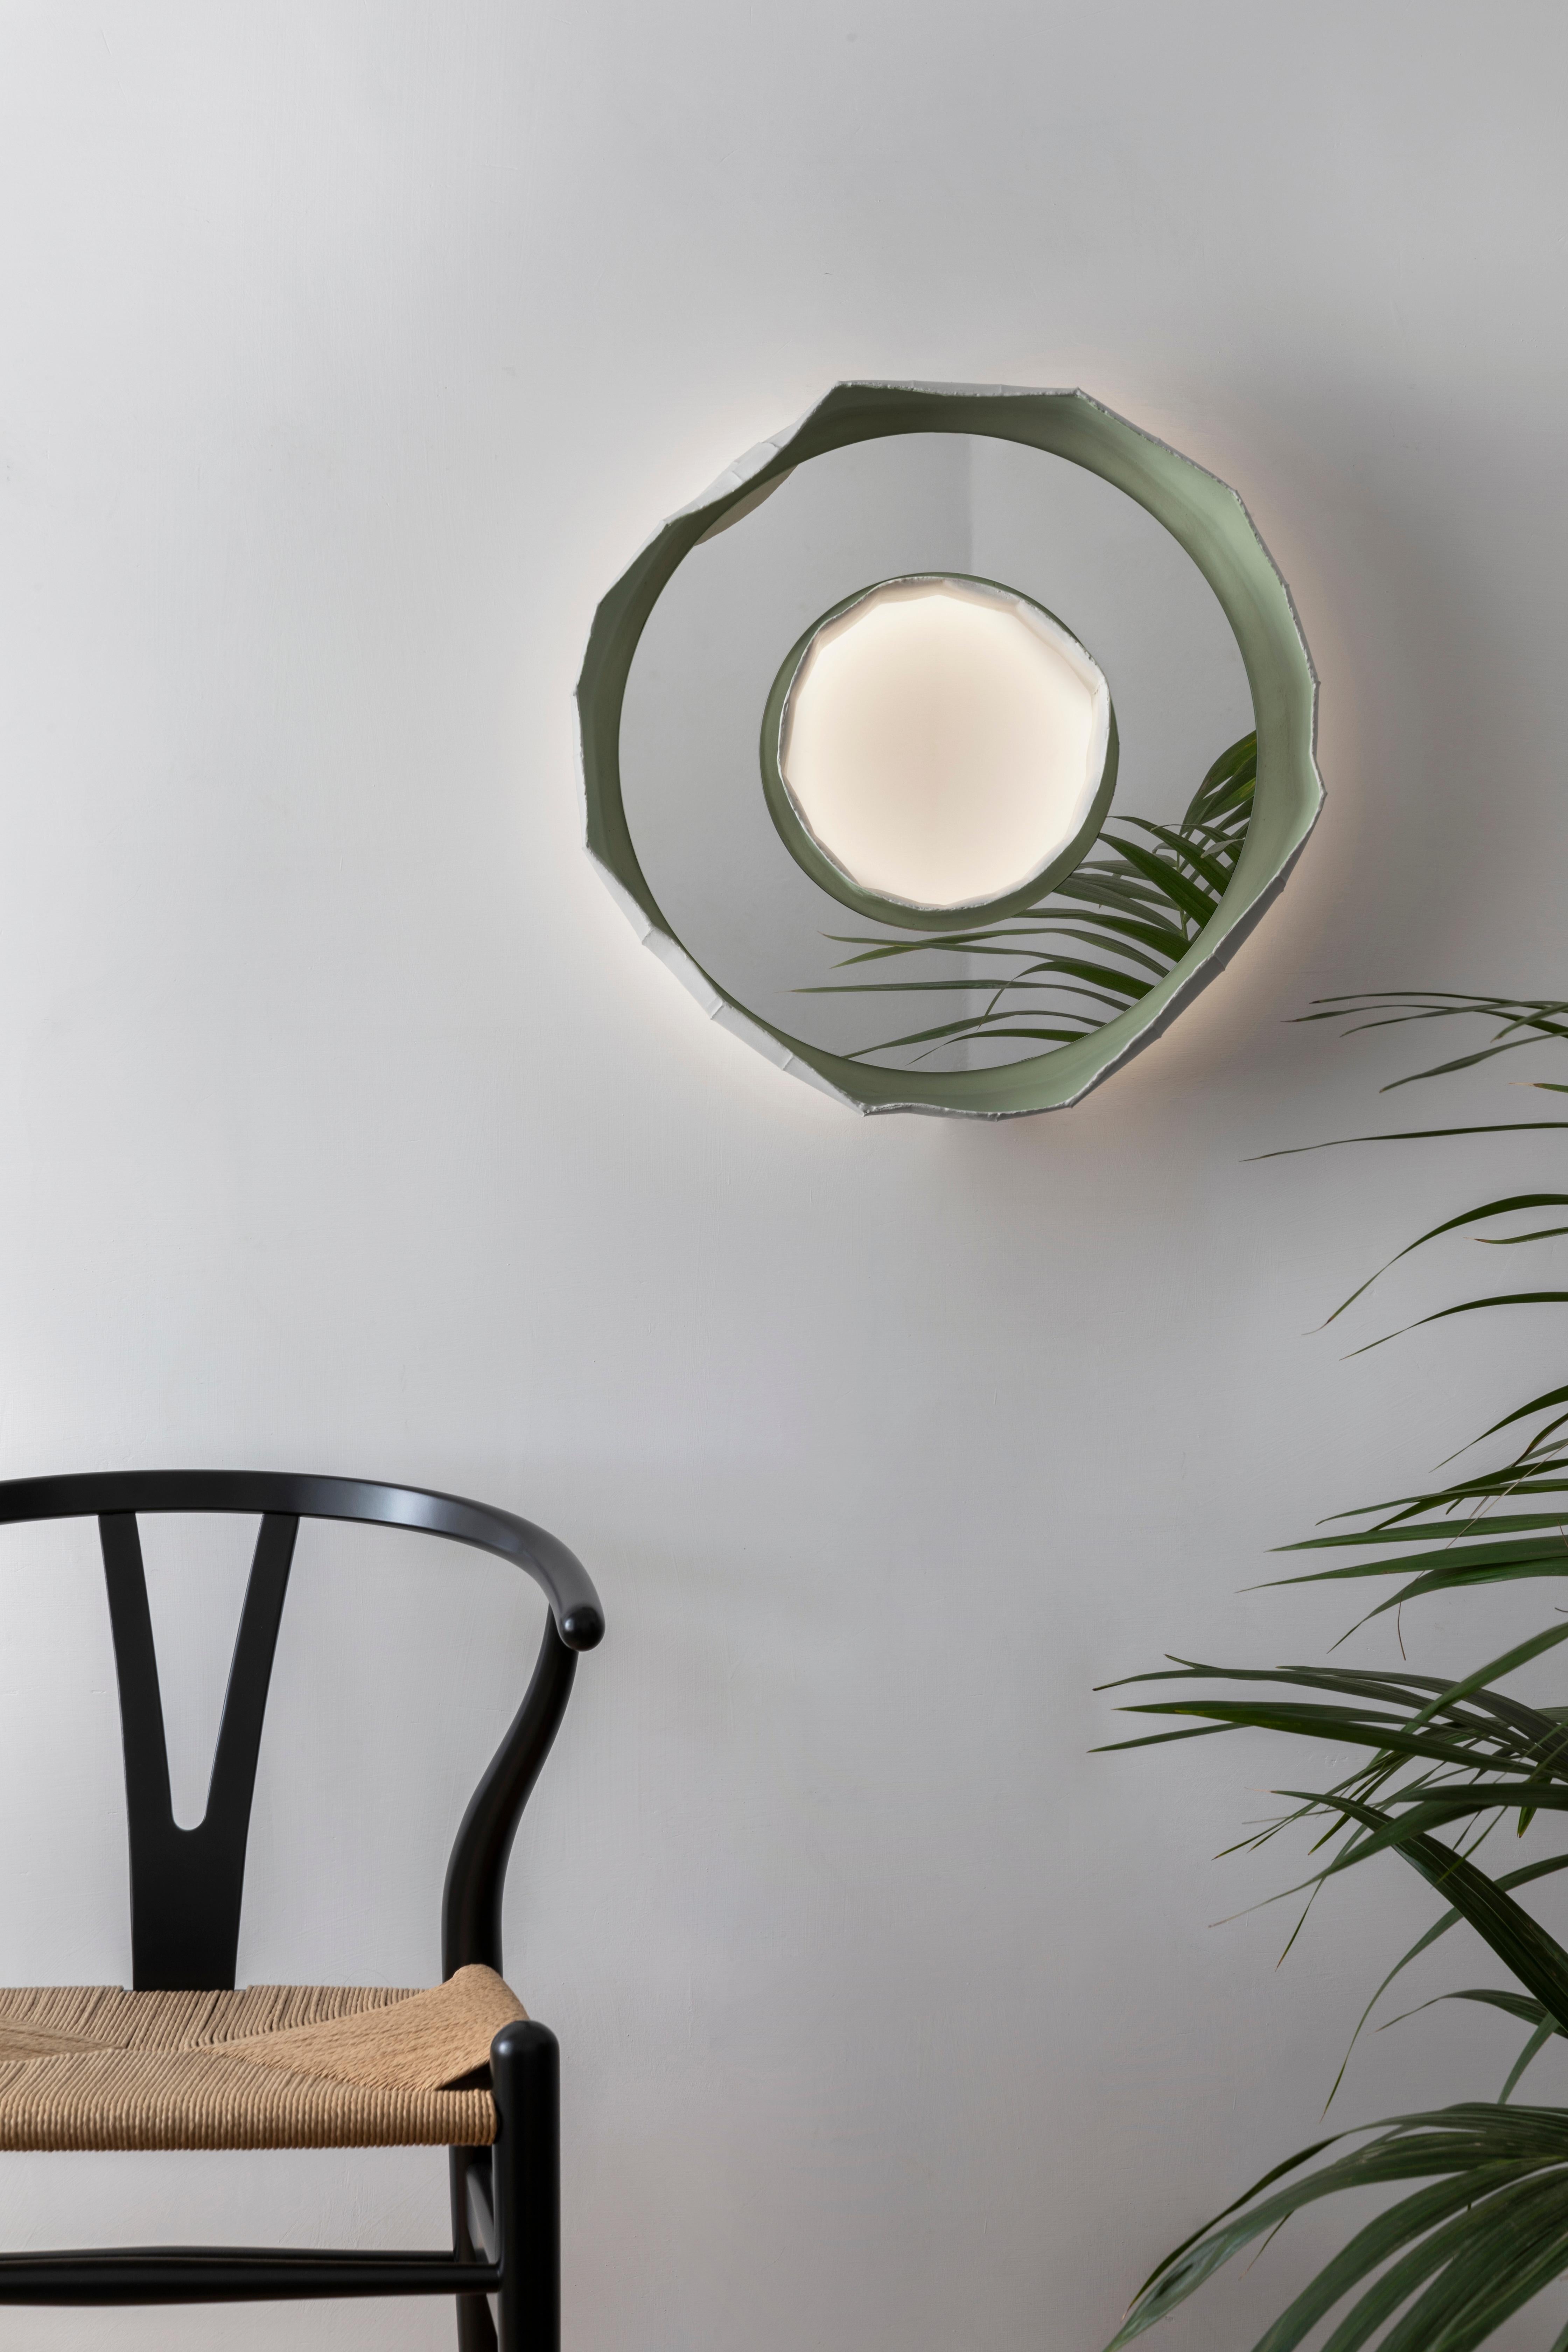 Ring Aura, a stunning mirror-lamp handmade in Italy, one of 2 designs that make up the collection REFLECTIONS, the result of a collaboration between artist Paola Paronetto & designer Giovanni Botticelli, that integrates ceramic with colour, glass